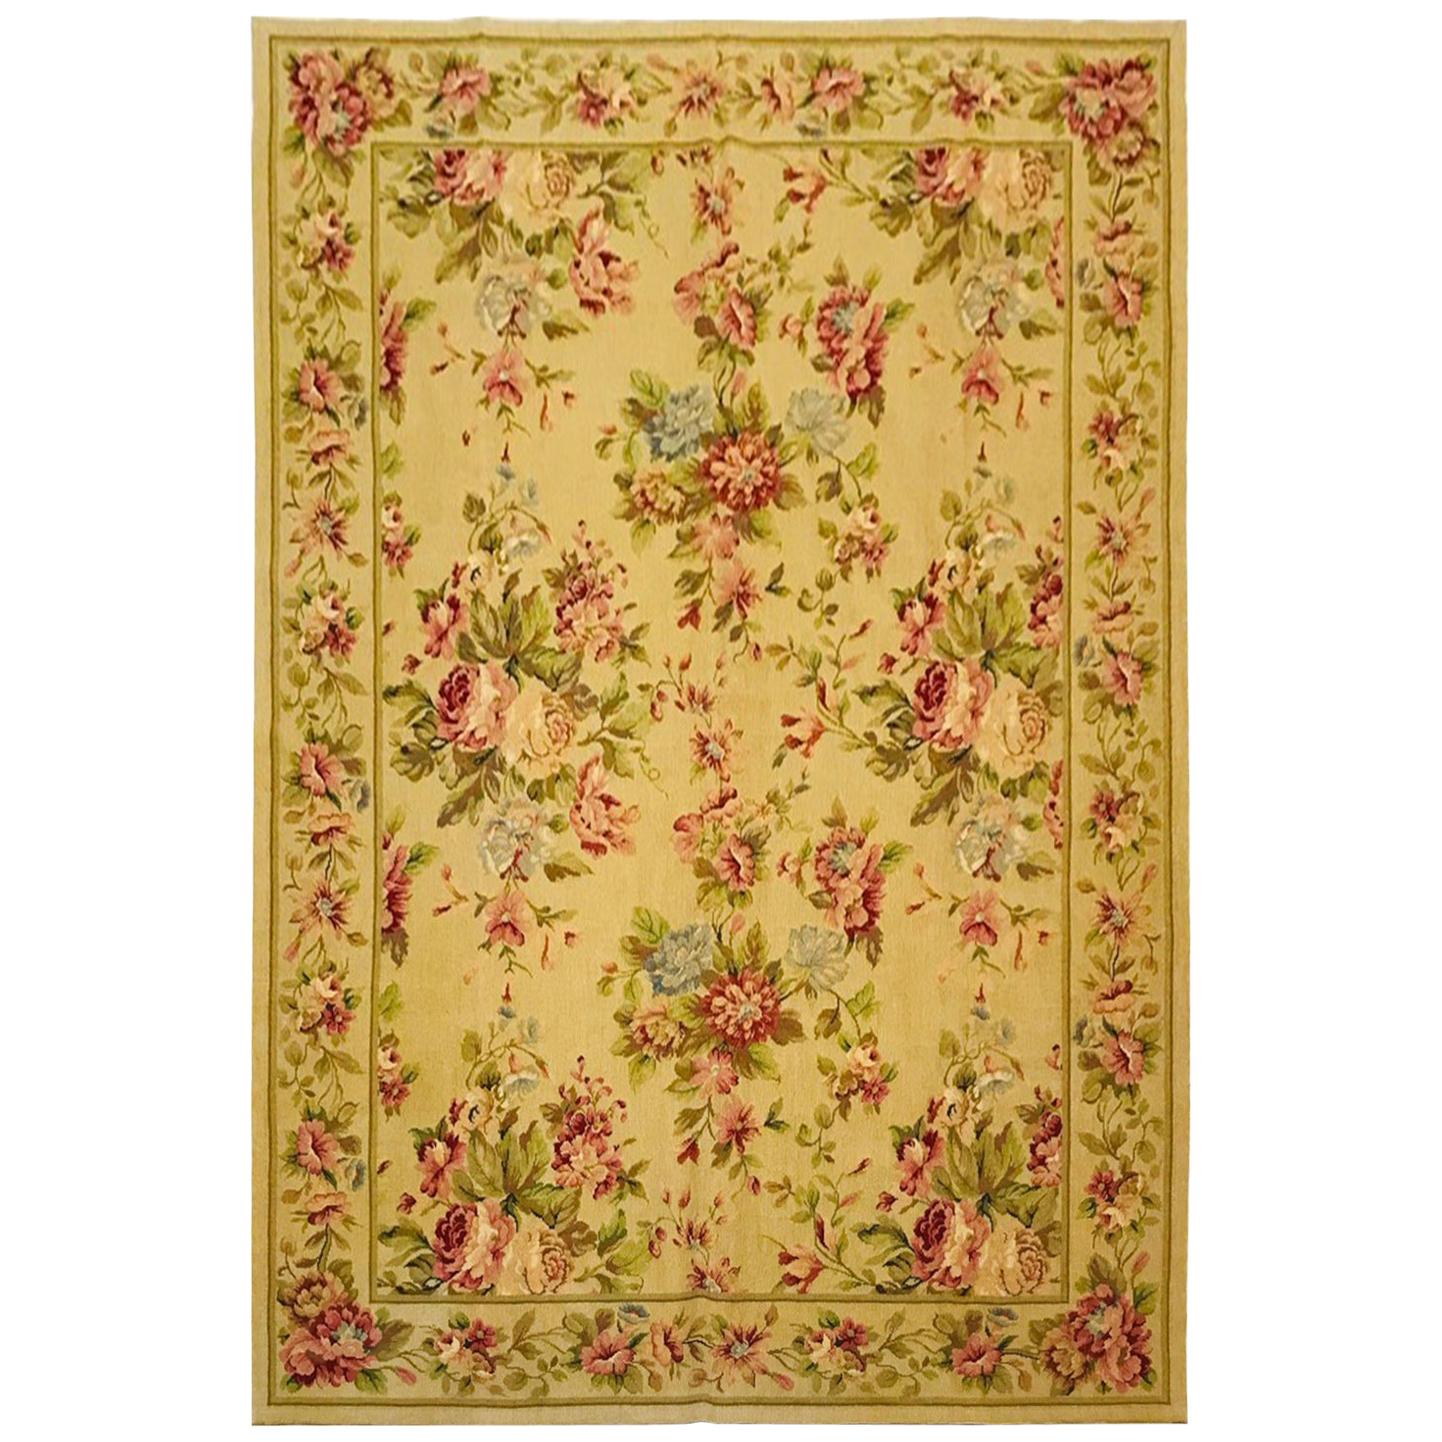 1970 Olive Green and Beige Petit Point Rug Hand Knotted in Wool with Flowers For Sale